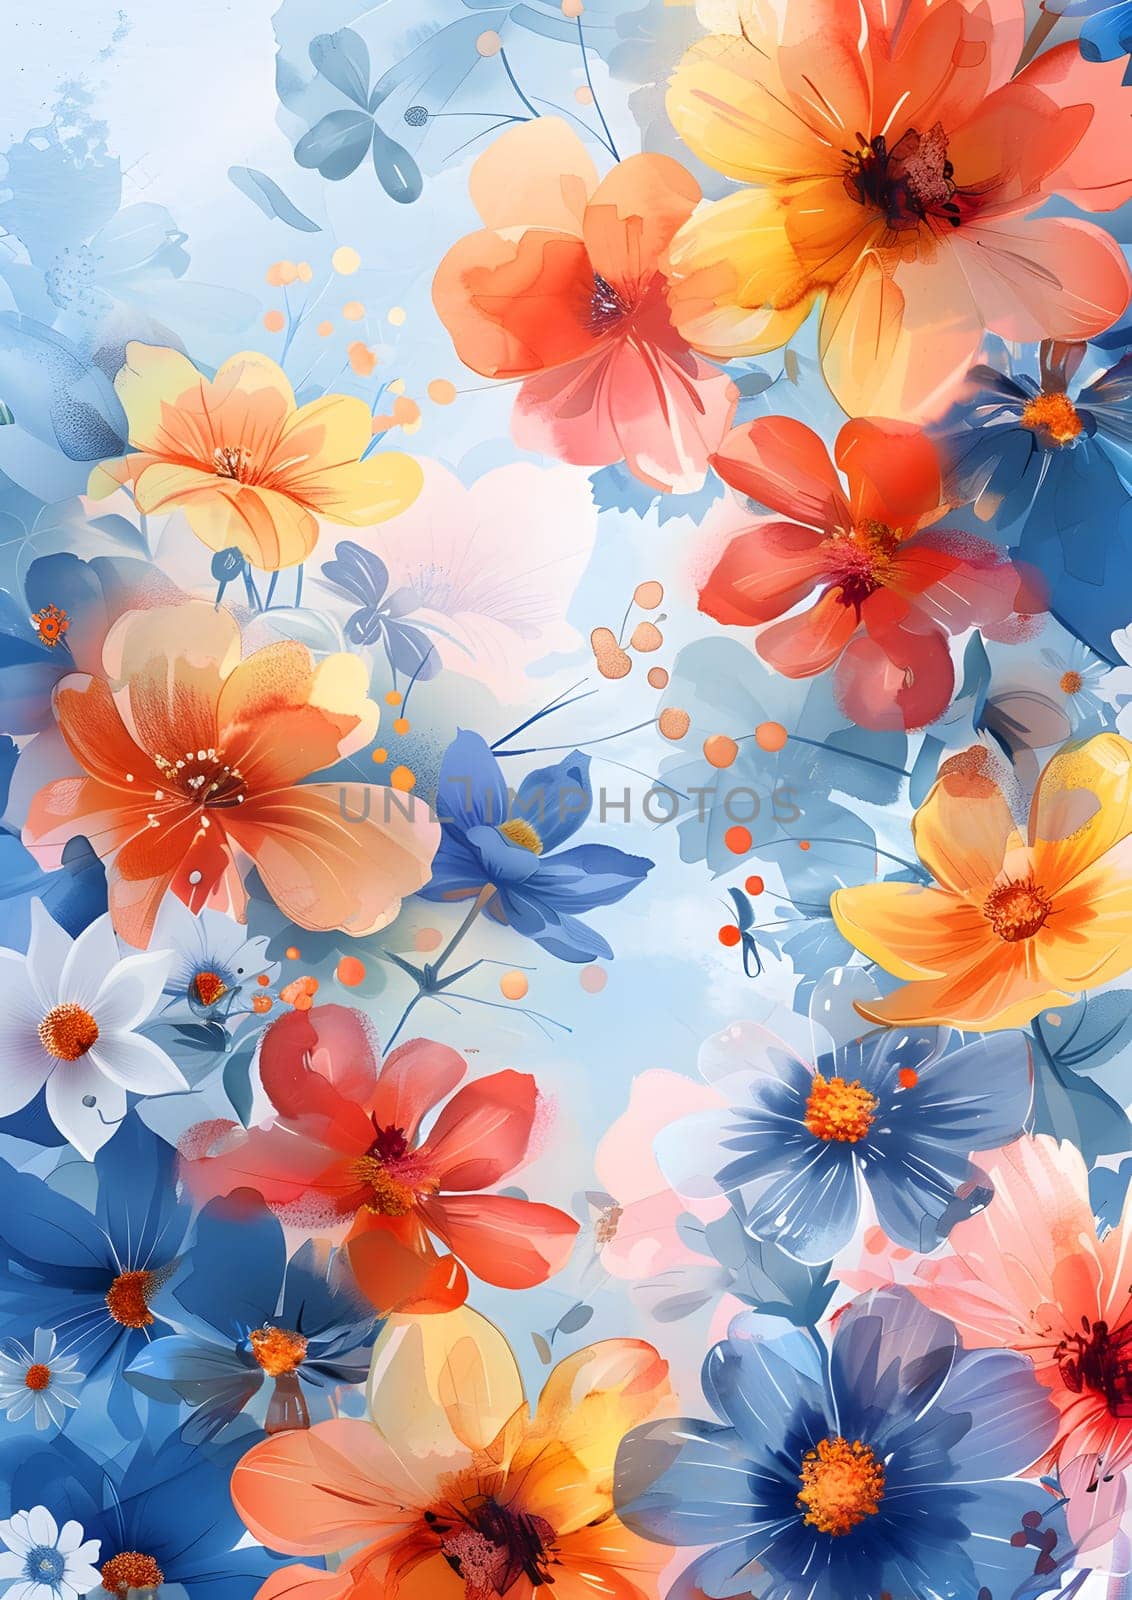 Vibrant flowers in shades of orange and azure bloom on a serene blue background, creating a stunning botanical art piece reminiscent of a cloudfilled sky